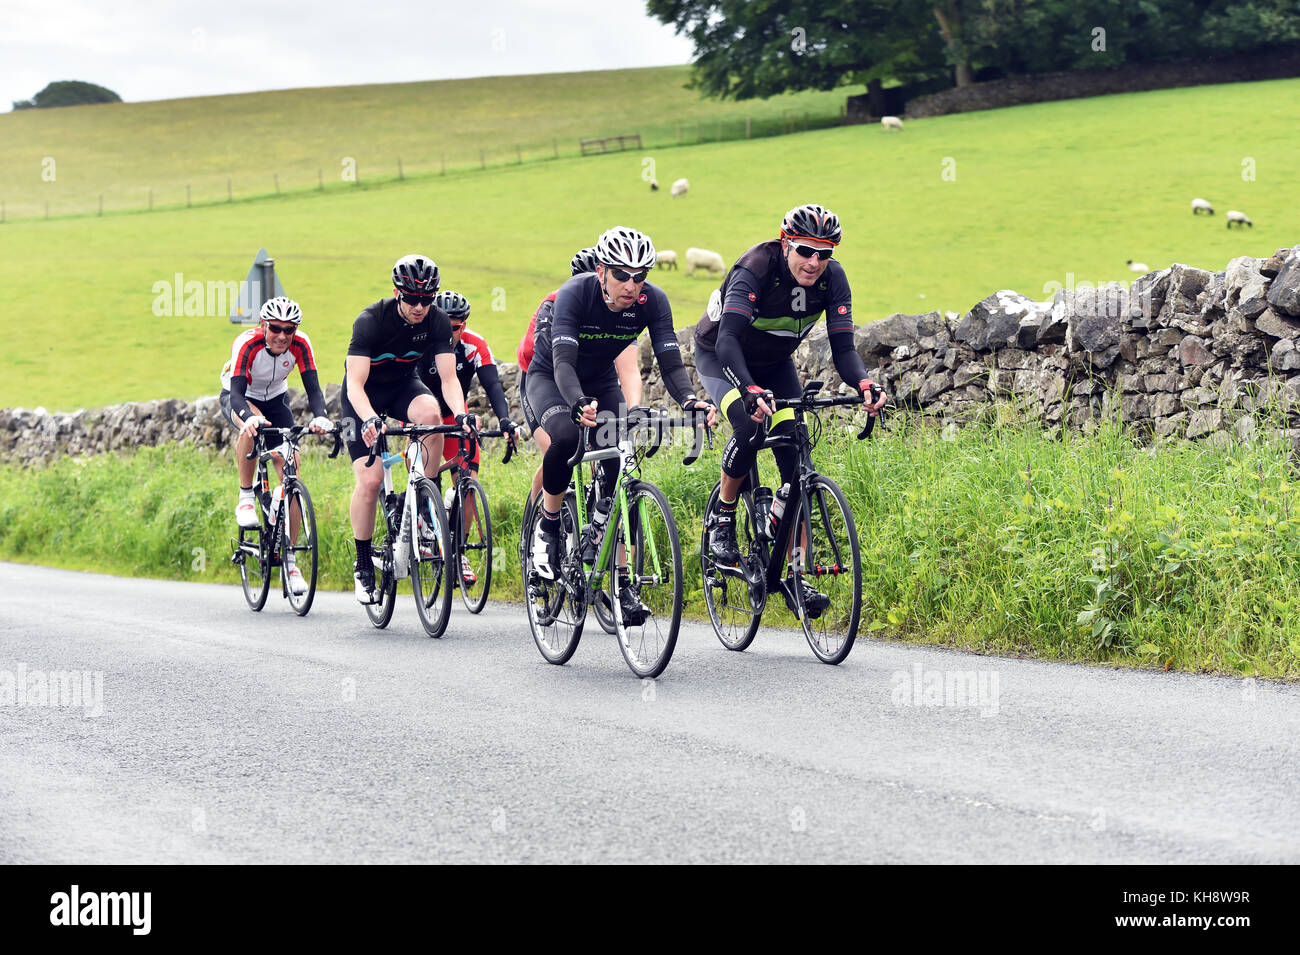 Cyclists riding on a country lane in the Yorkshire Dales, UK Stock Photo